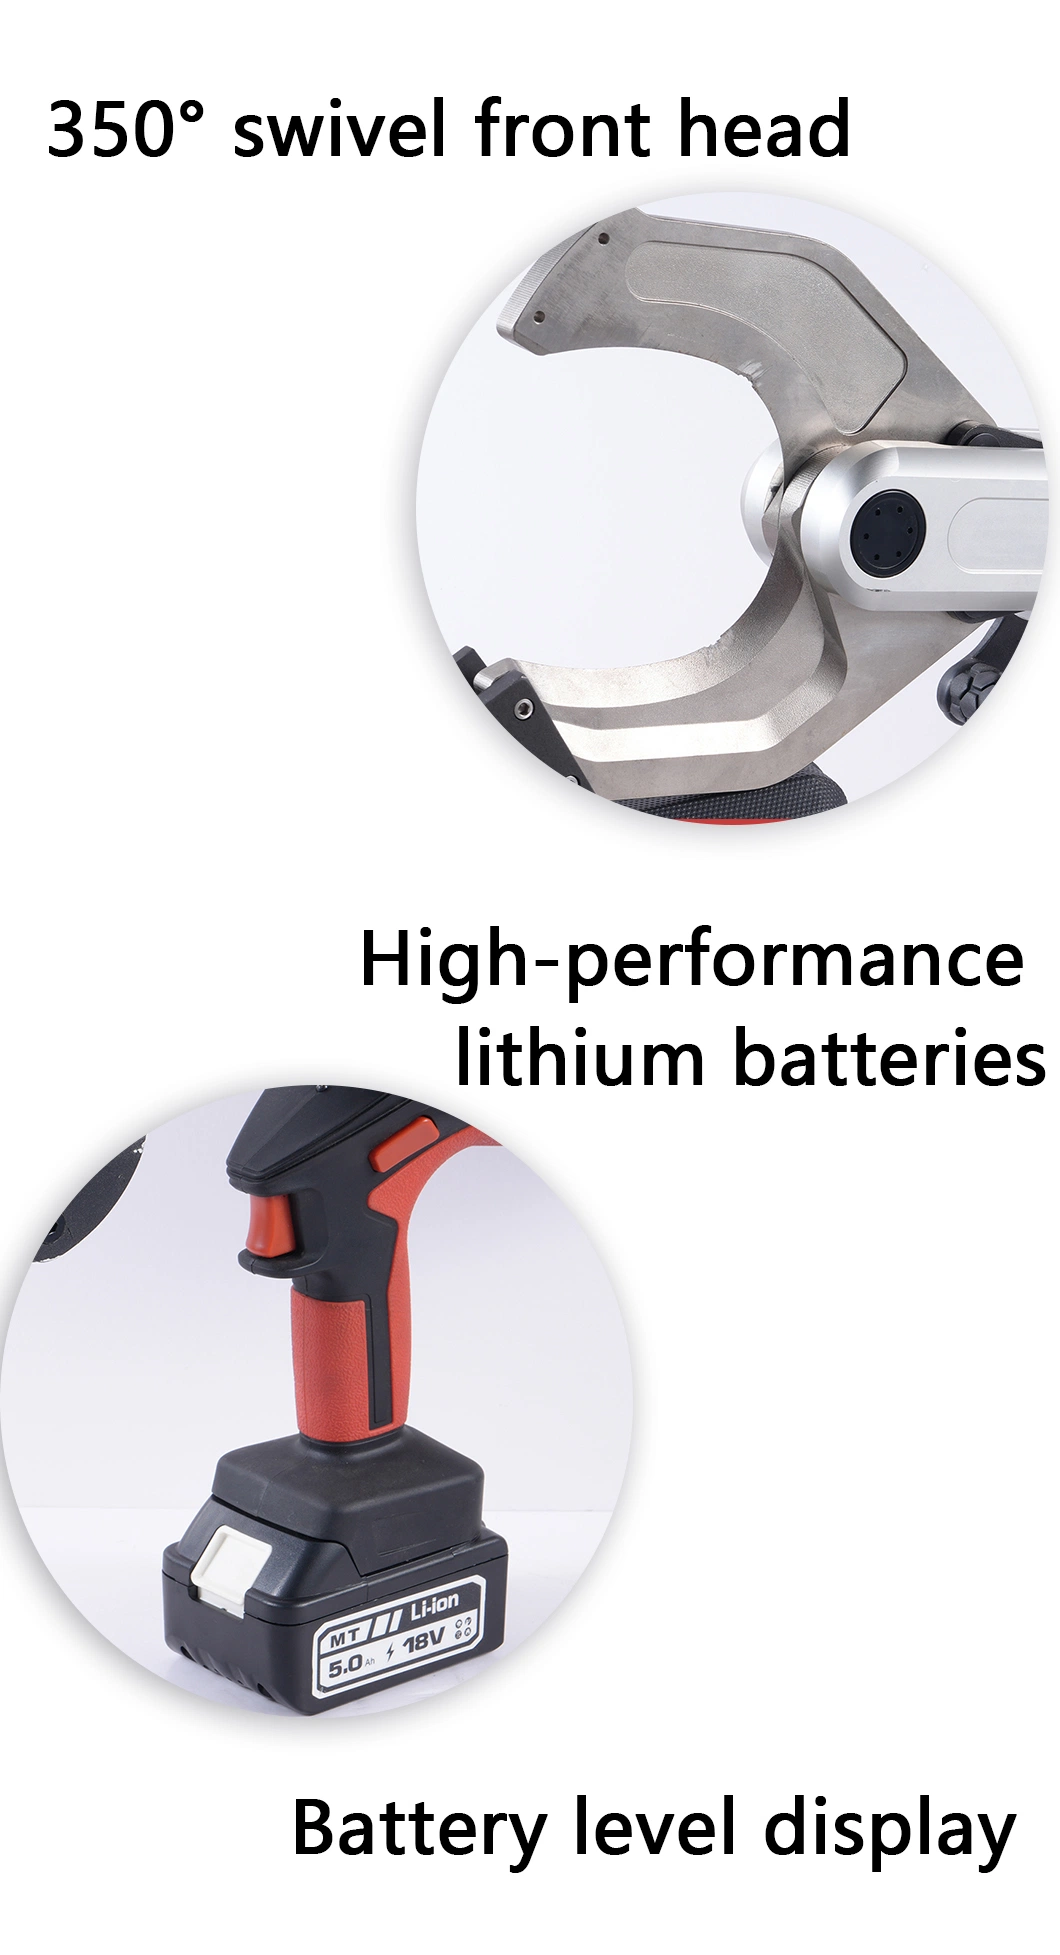 Electric Hydraulic Cable Cutter Hydraulic Tools 140kn High Performance Lithium Battery Ratchet Aluminum Battery Multi Hand Electric